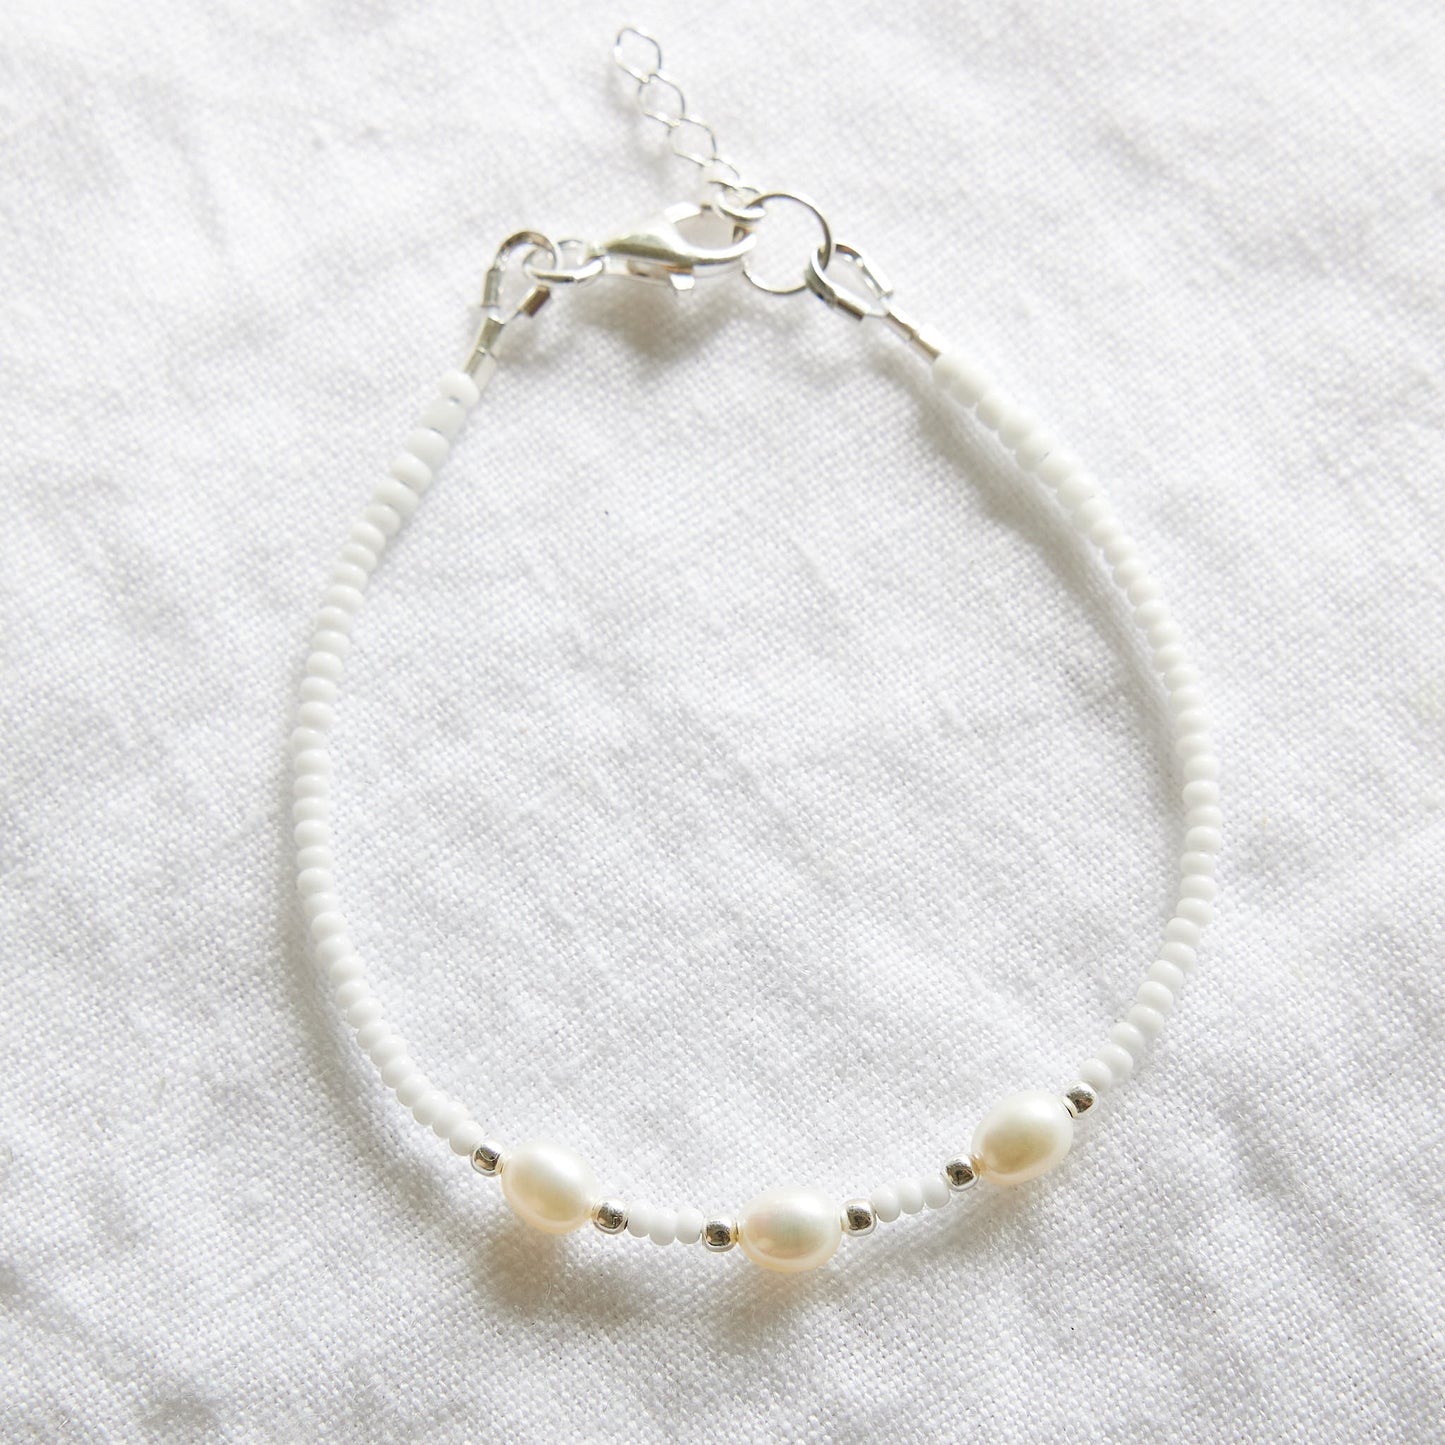 White glass bracelet with freshwater cultured pearls